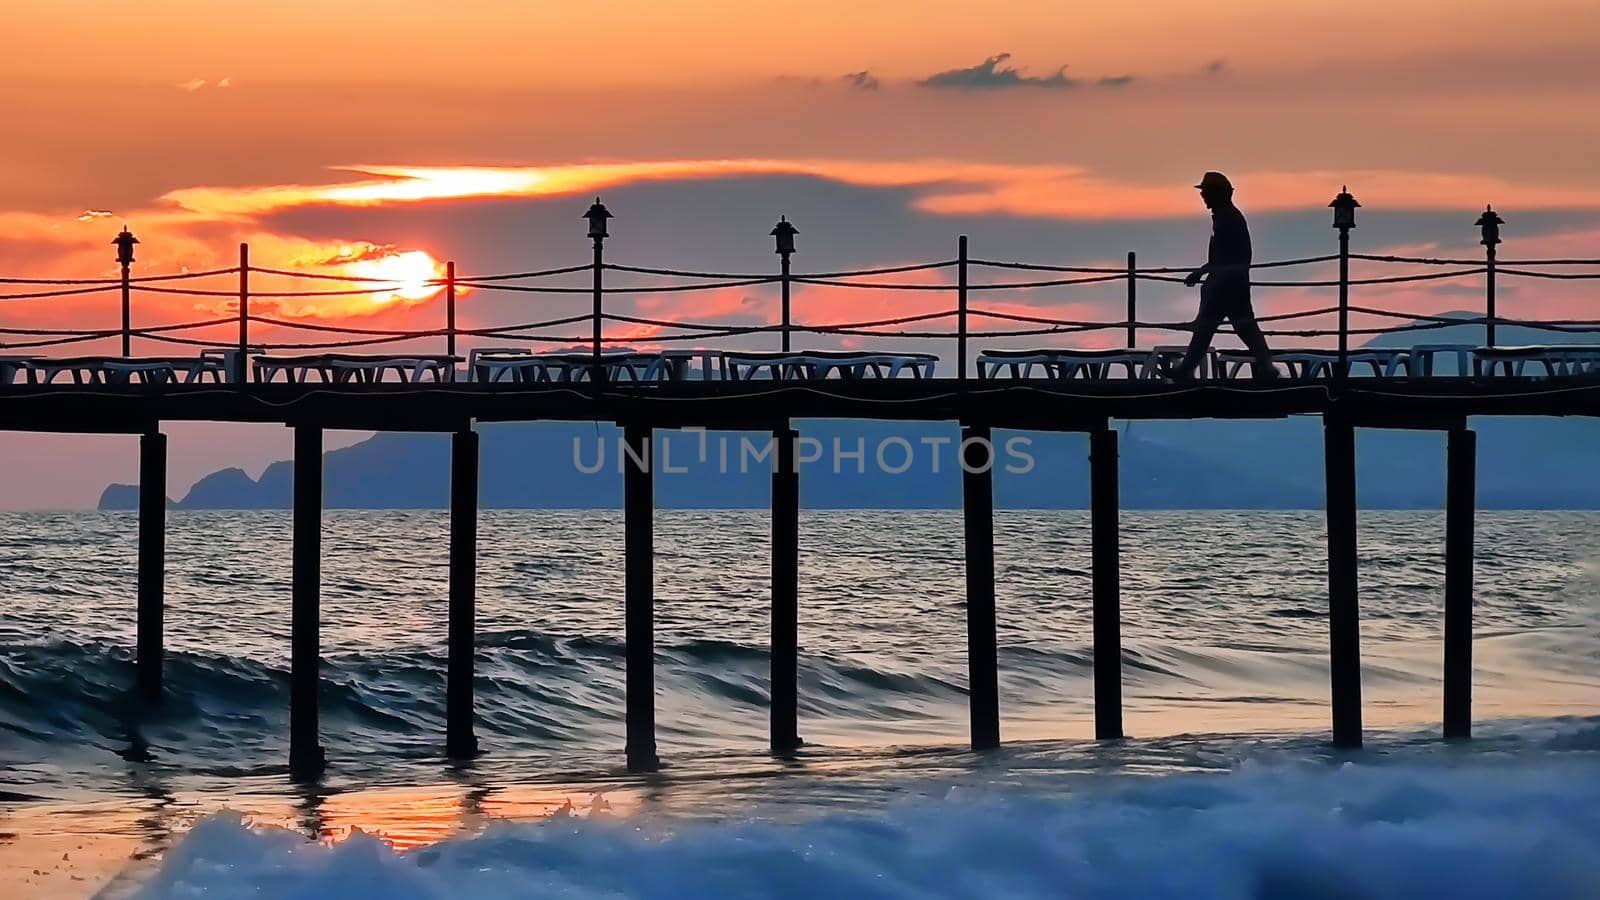 Evening seascape with beautiful sunset. Silhouette of man walking on bridge over sea, in background of sunset.